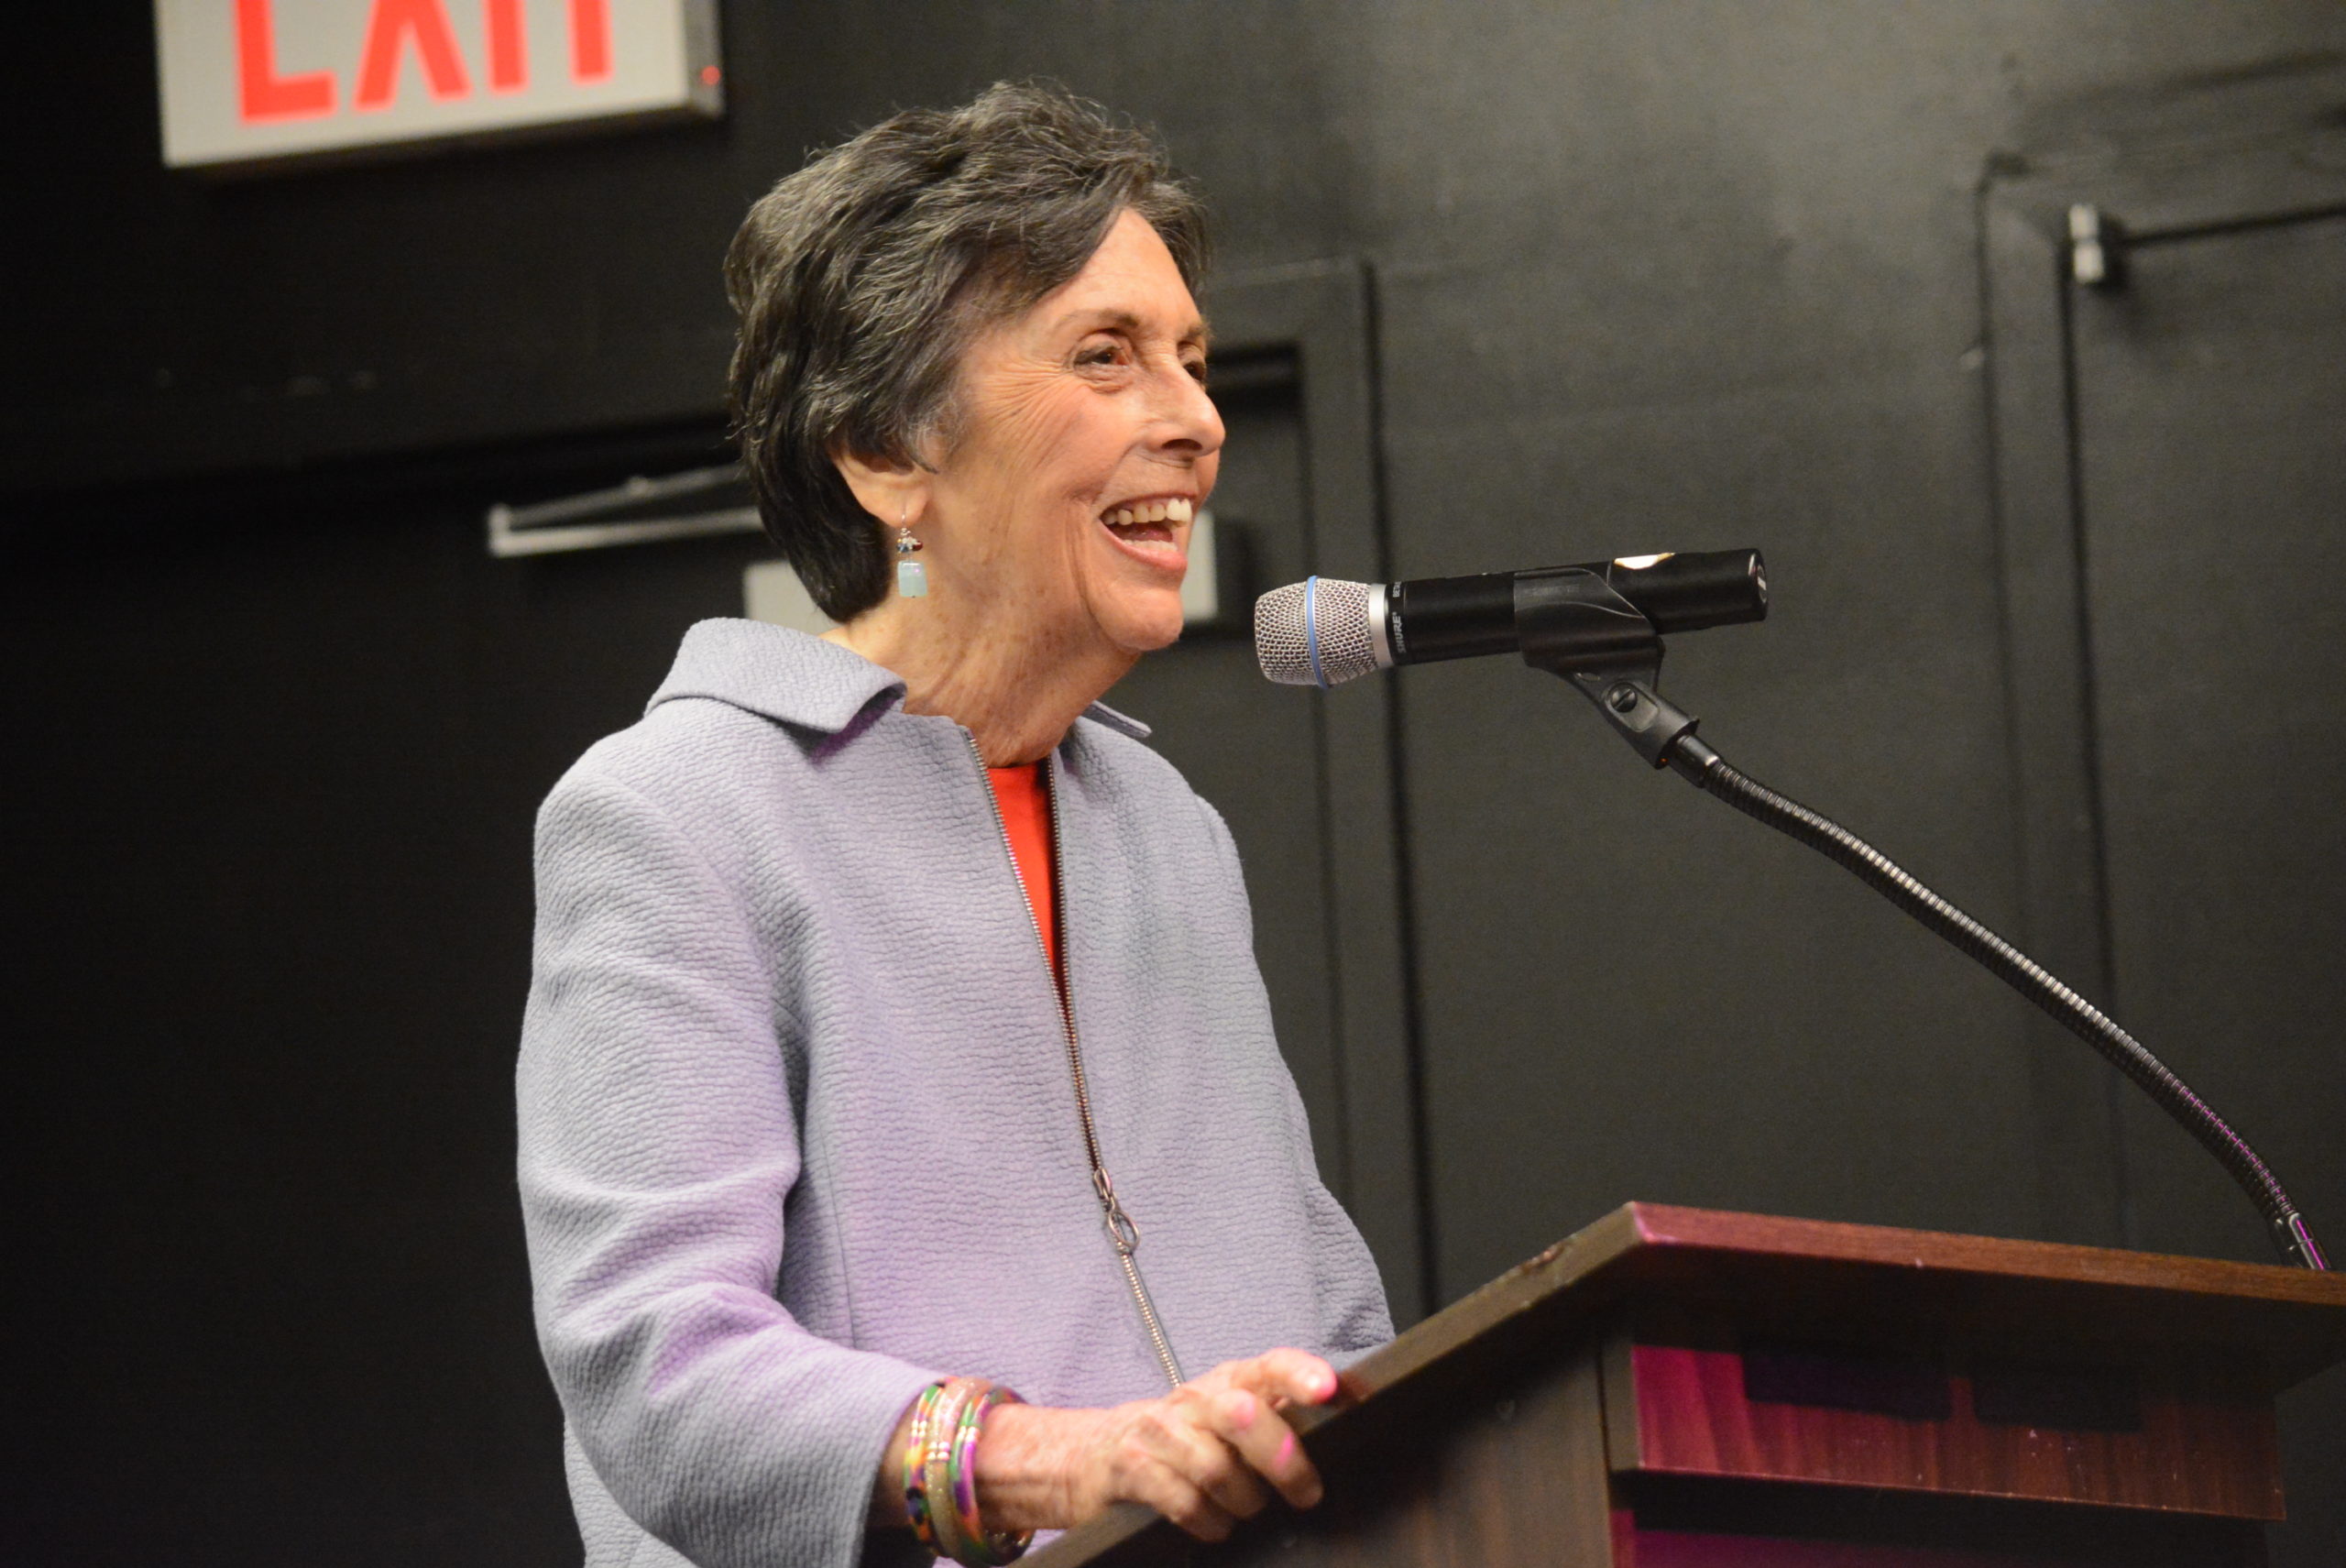 Francine Klagsbrun, the author of "Lioness: Golda Mier and the Nation of Israel," came to the Gold Coast Arts Center to speak about Israel's fourth prime minister. (Photo by Janelle Clausen)